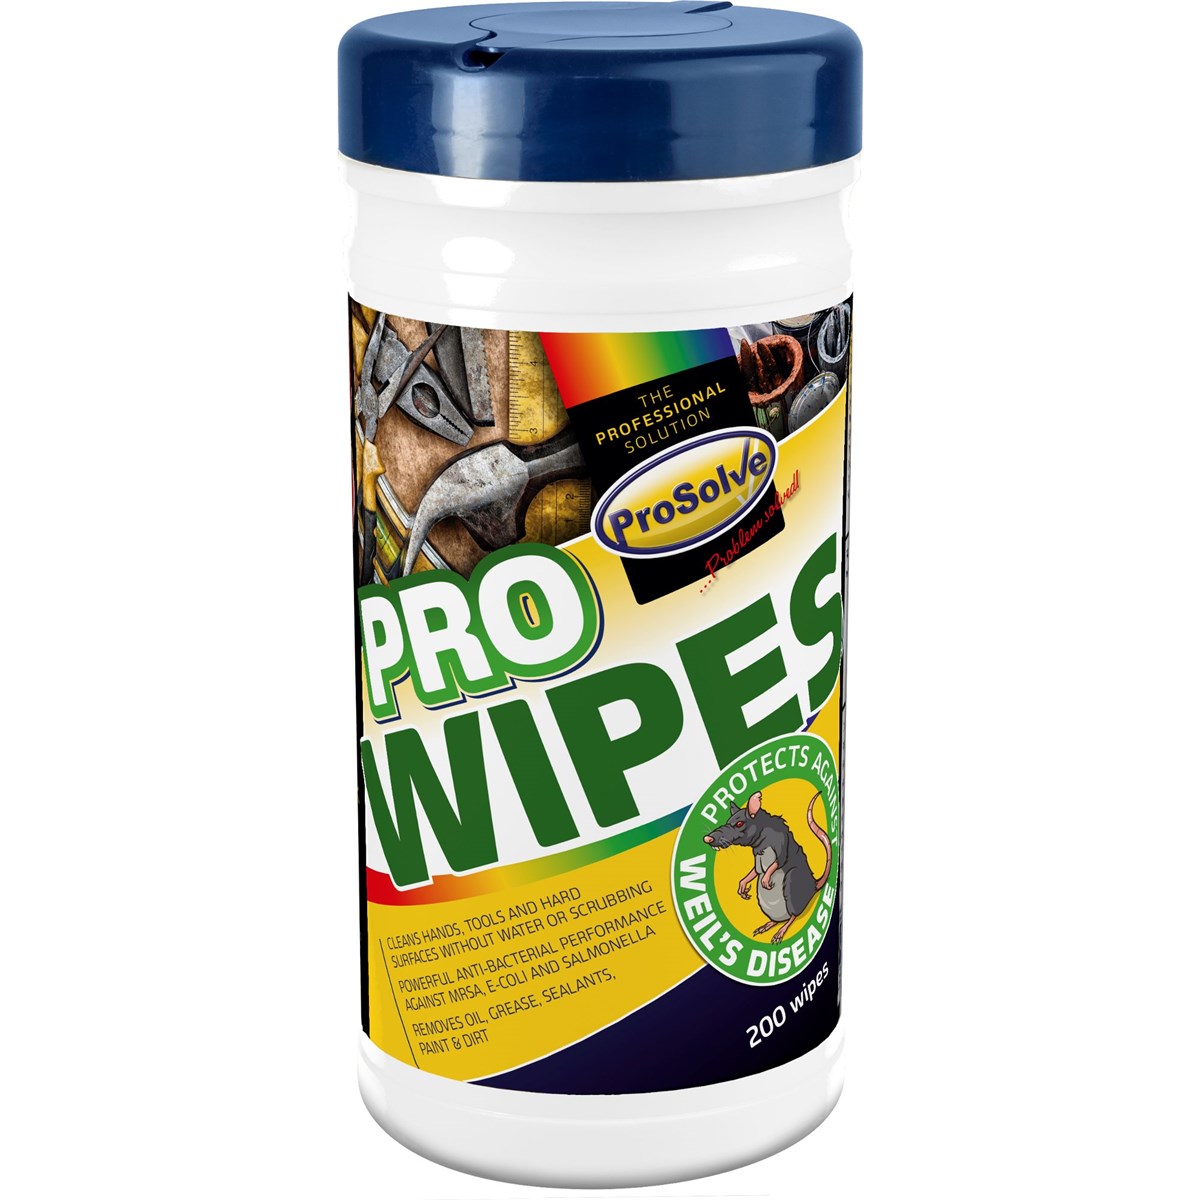 Core Products, Hydroxi Pro Industrial Strength Cleaning Wipes, Small Tub